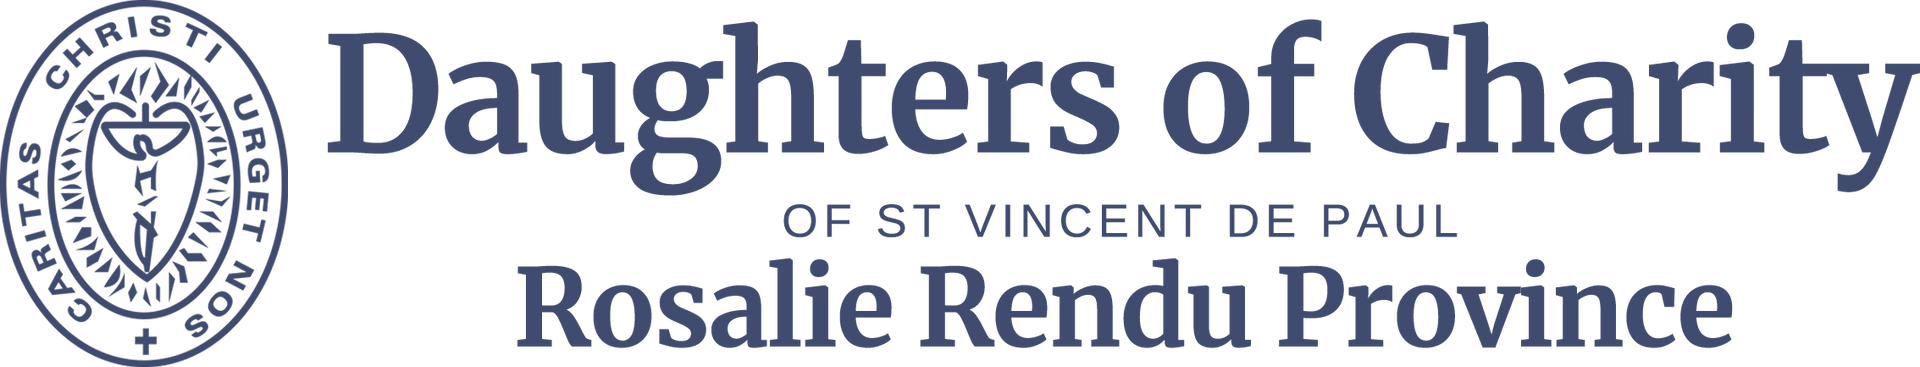 a logo for the daughters of charity of st vincent de paul